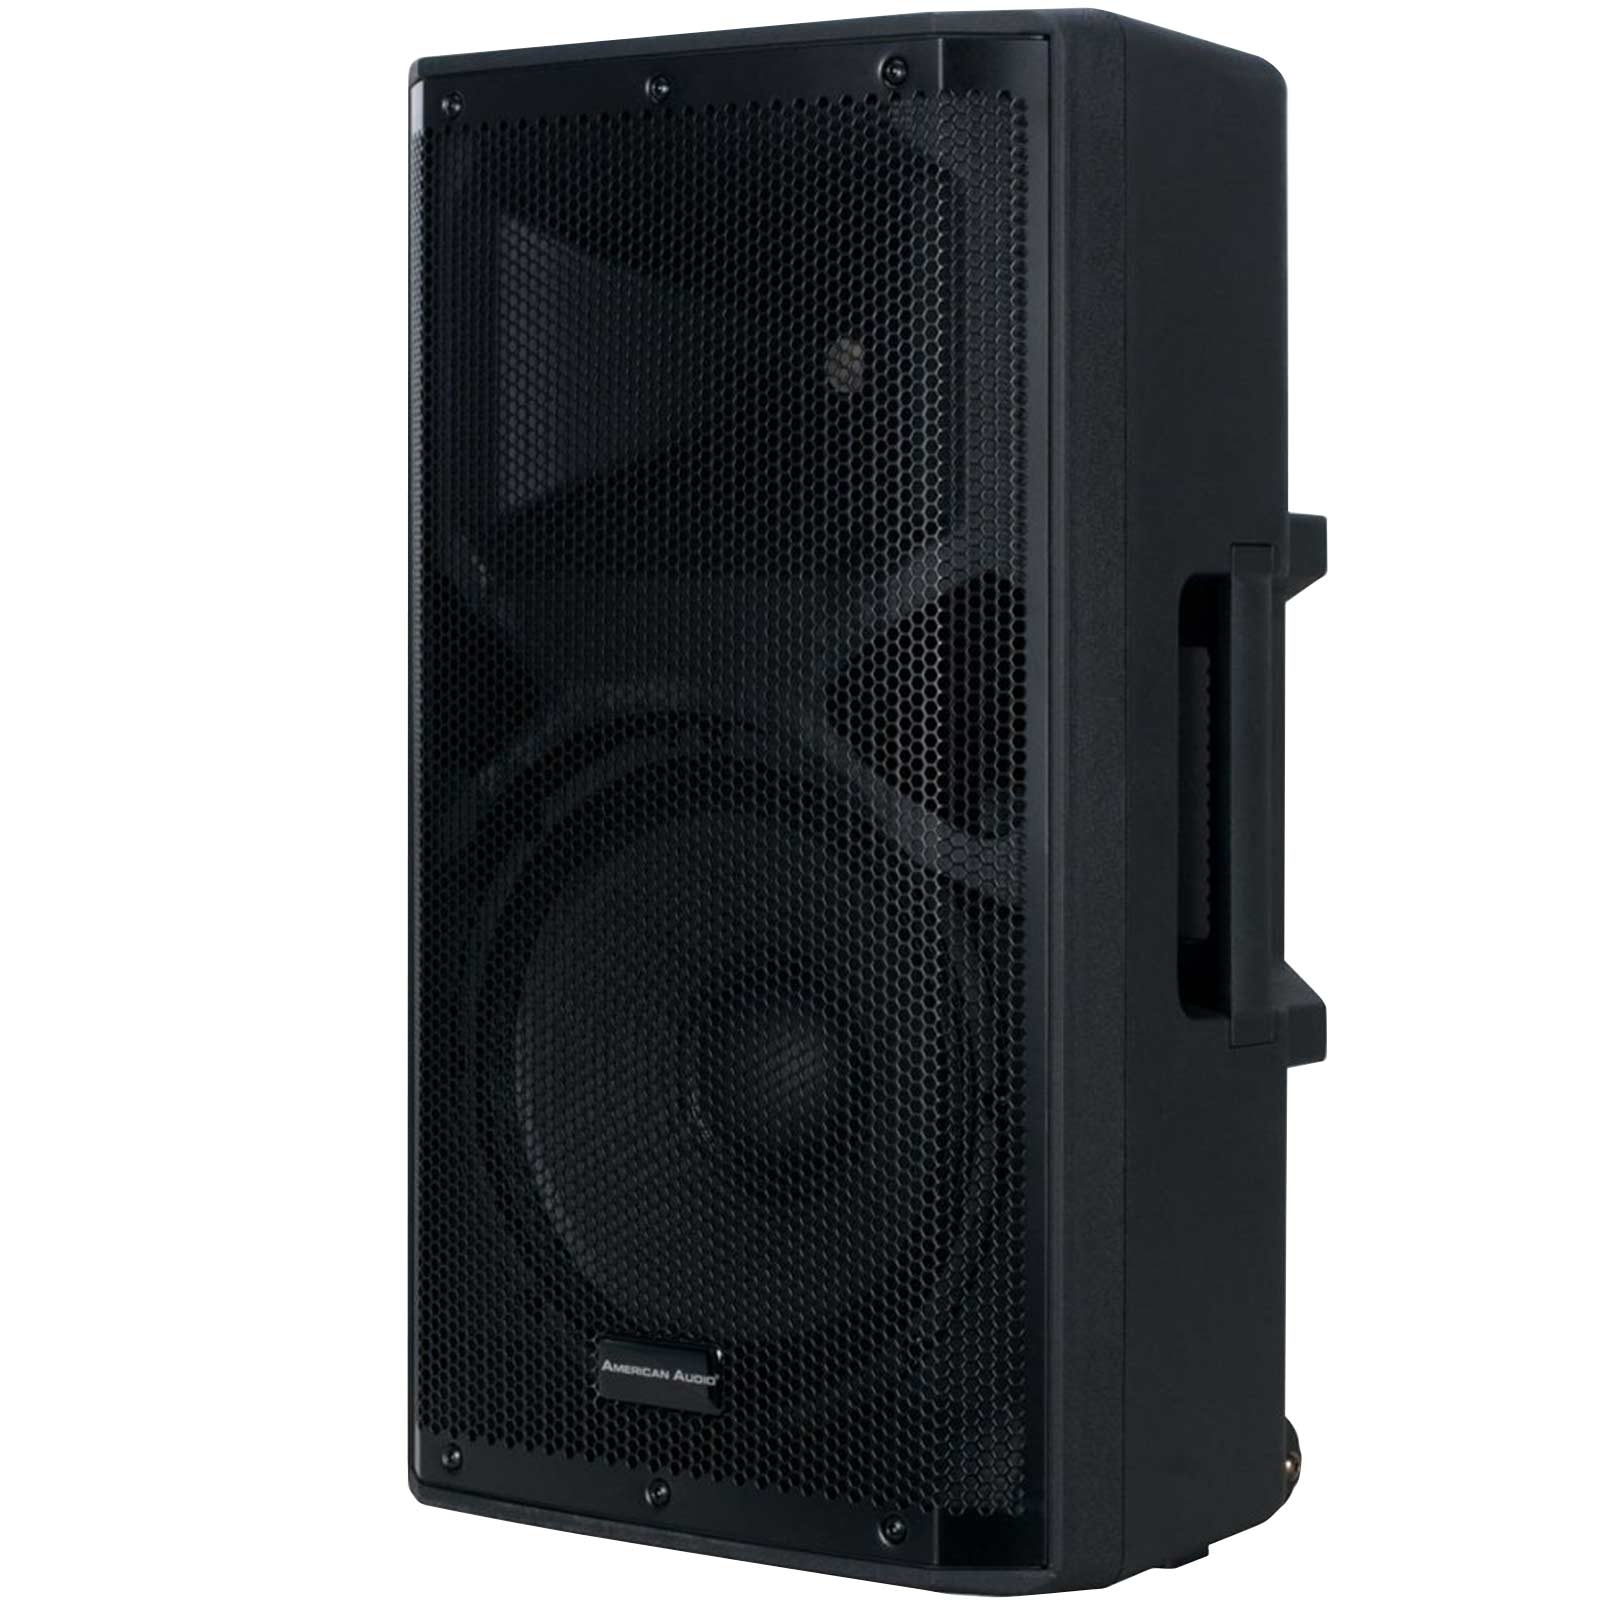 American Audio APX12 GO BT 12" 2-Way Battery Powered 200W Active Loudspeaker with Tripod Speaker Stand Package - image 3 of 9